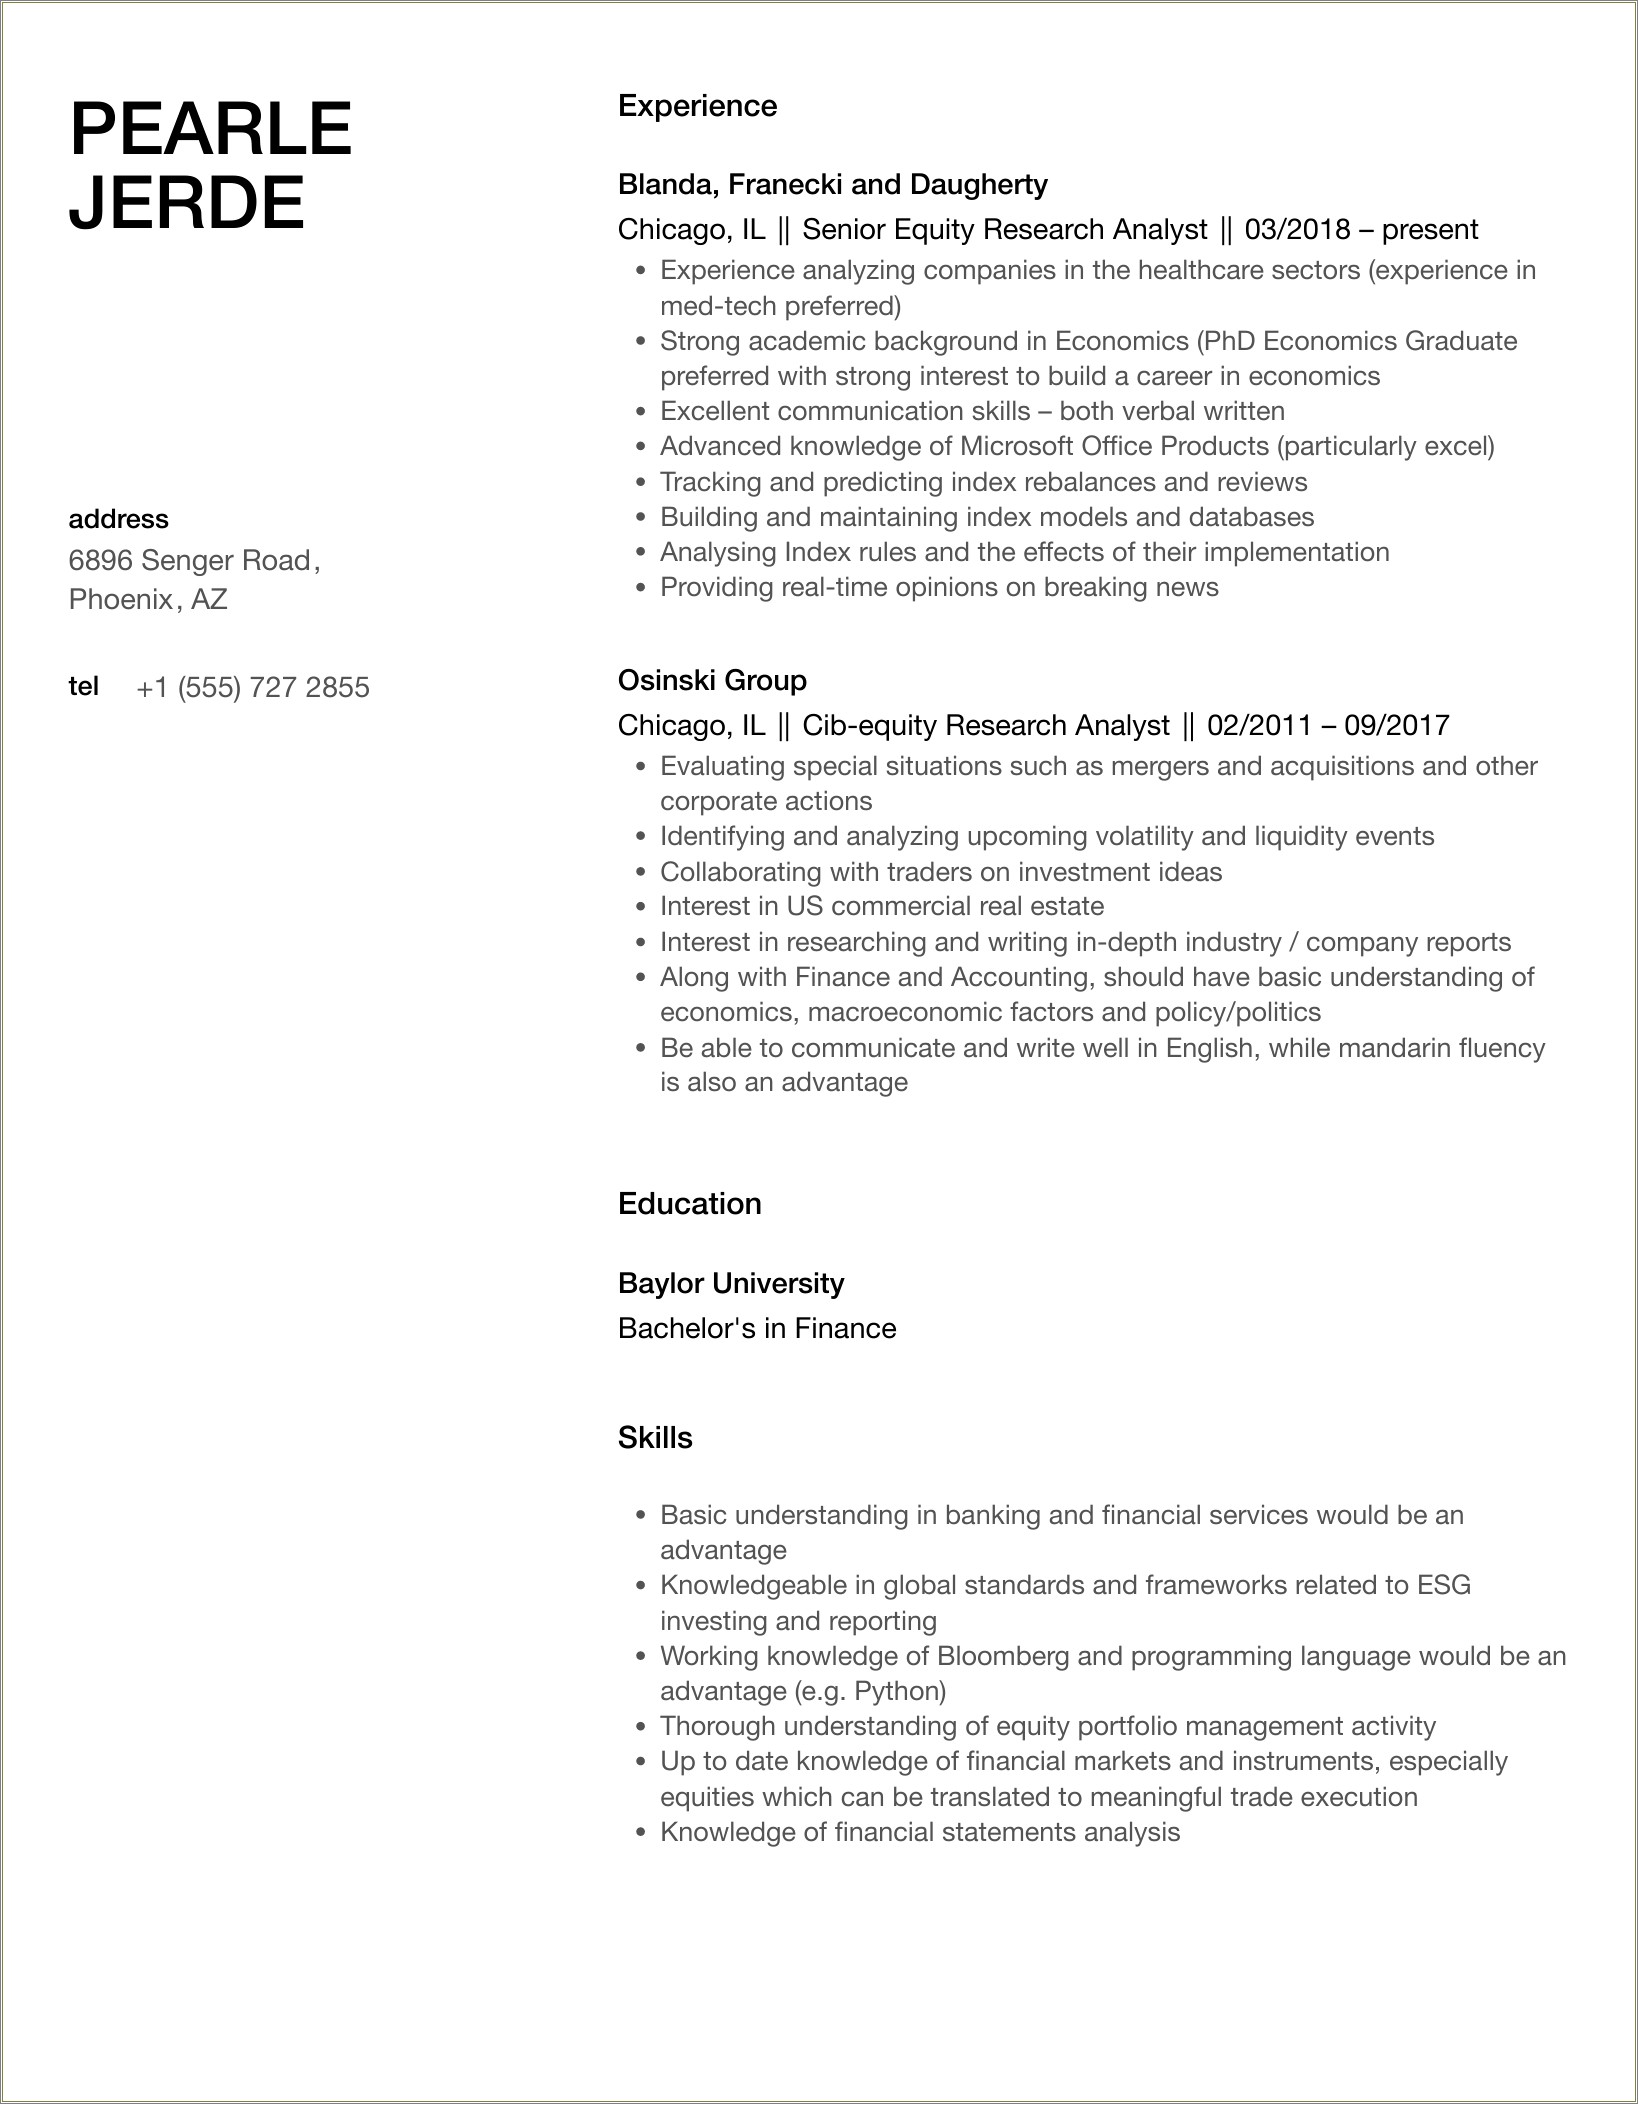 Resume Summary Statement Of Equity Researcher